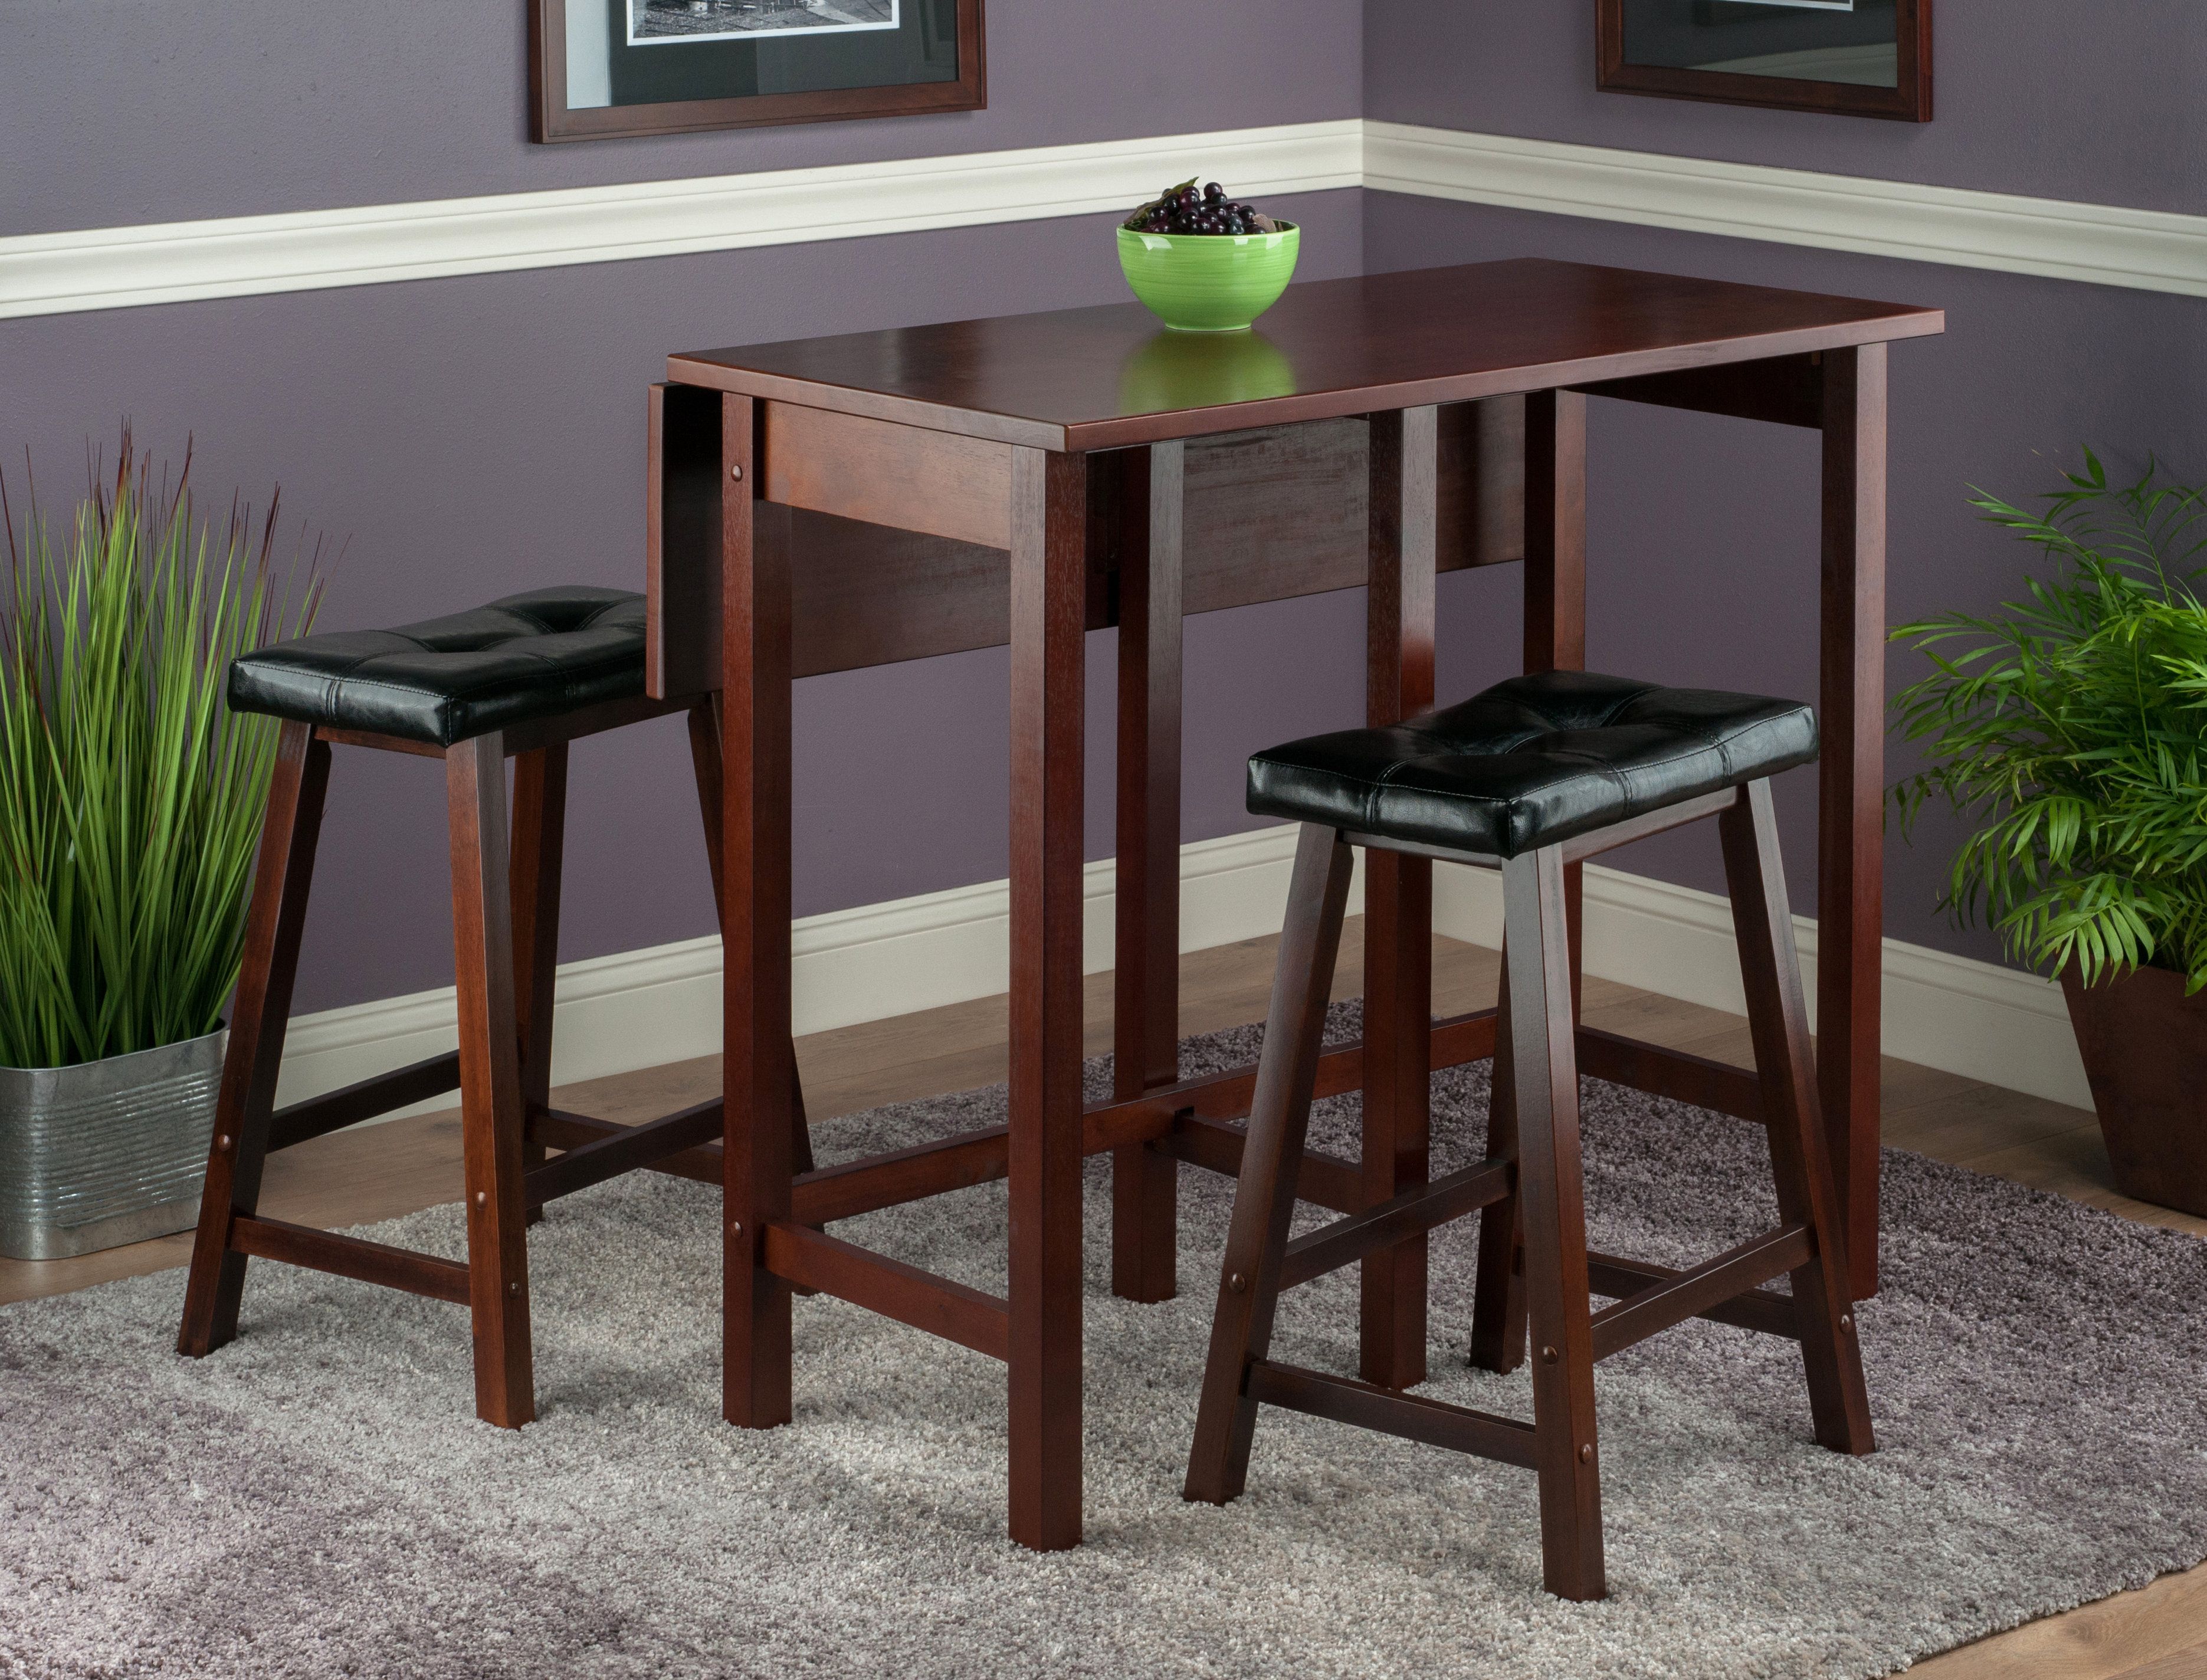 Bettencourt 3 Piece Counter Height Dining Set Throughout Most Popular Bettencourt 3 Piece Counter Height Dining Sets (View 1 of 20)